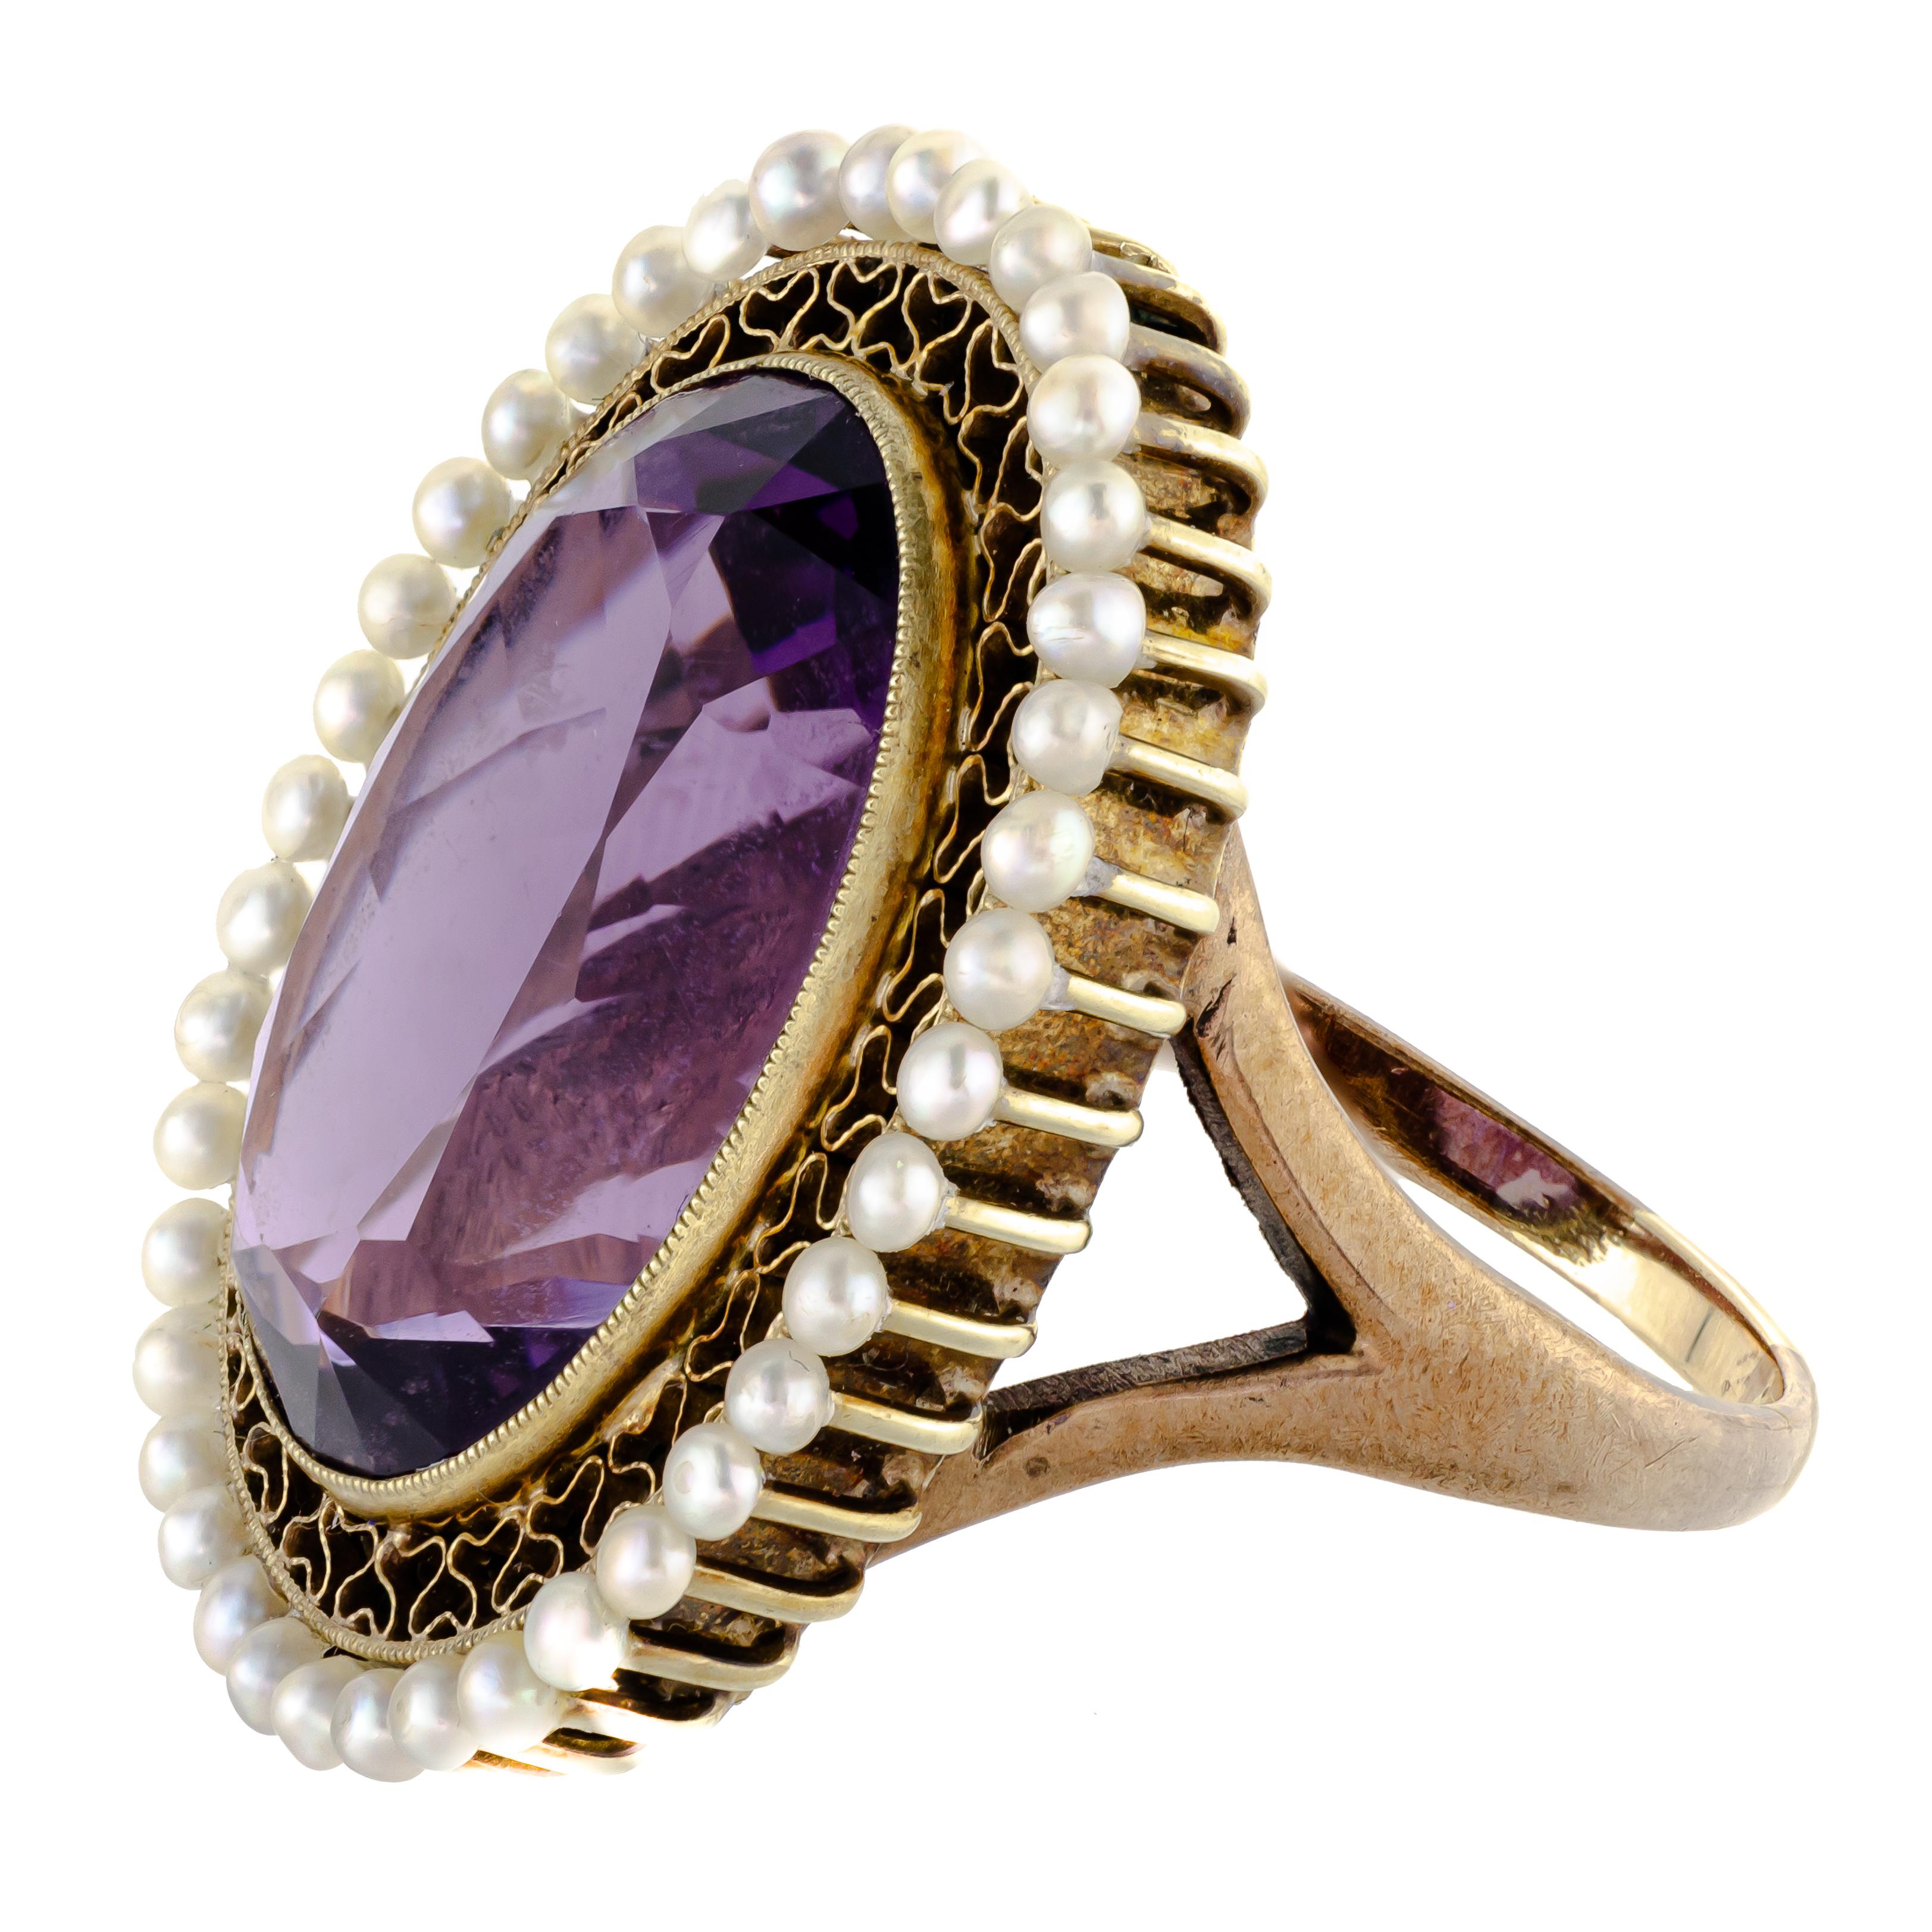 Absolutely beautiful antique impressive size amethyst pearl and 14kt yellow gold ring centrally set with one large oval shaped faceted deep vibrant purple amethyst measuring approximately 19 x 14 x 9.5mm depth with an approximate weight of 13.40